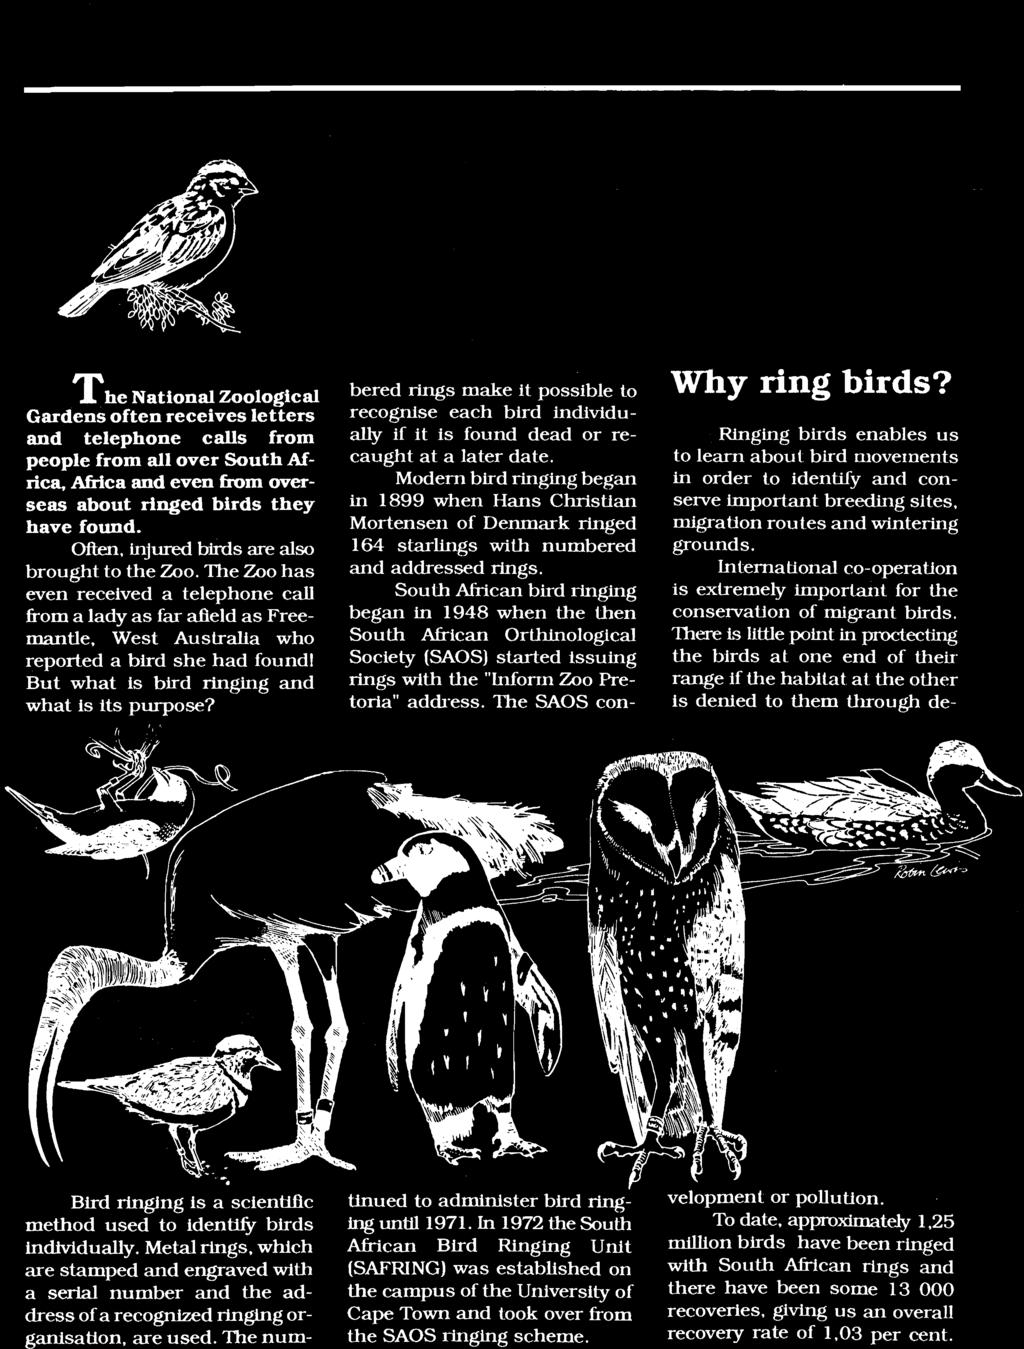 West Australia who reported a bird she had found I But what is bird ringing and what is its purpose? Why ring birds? Bird ringing is a scientific method used to identify birds individually.